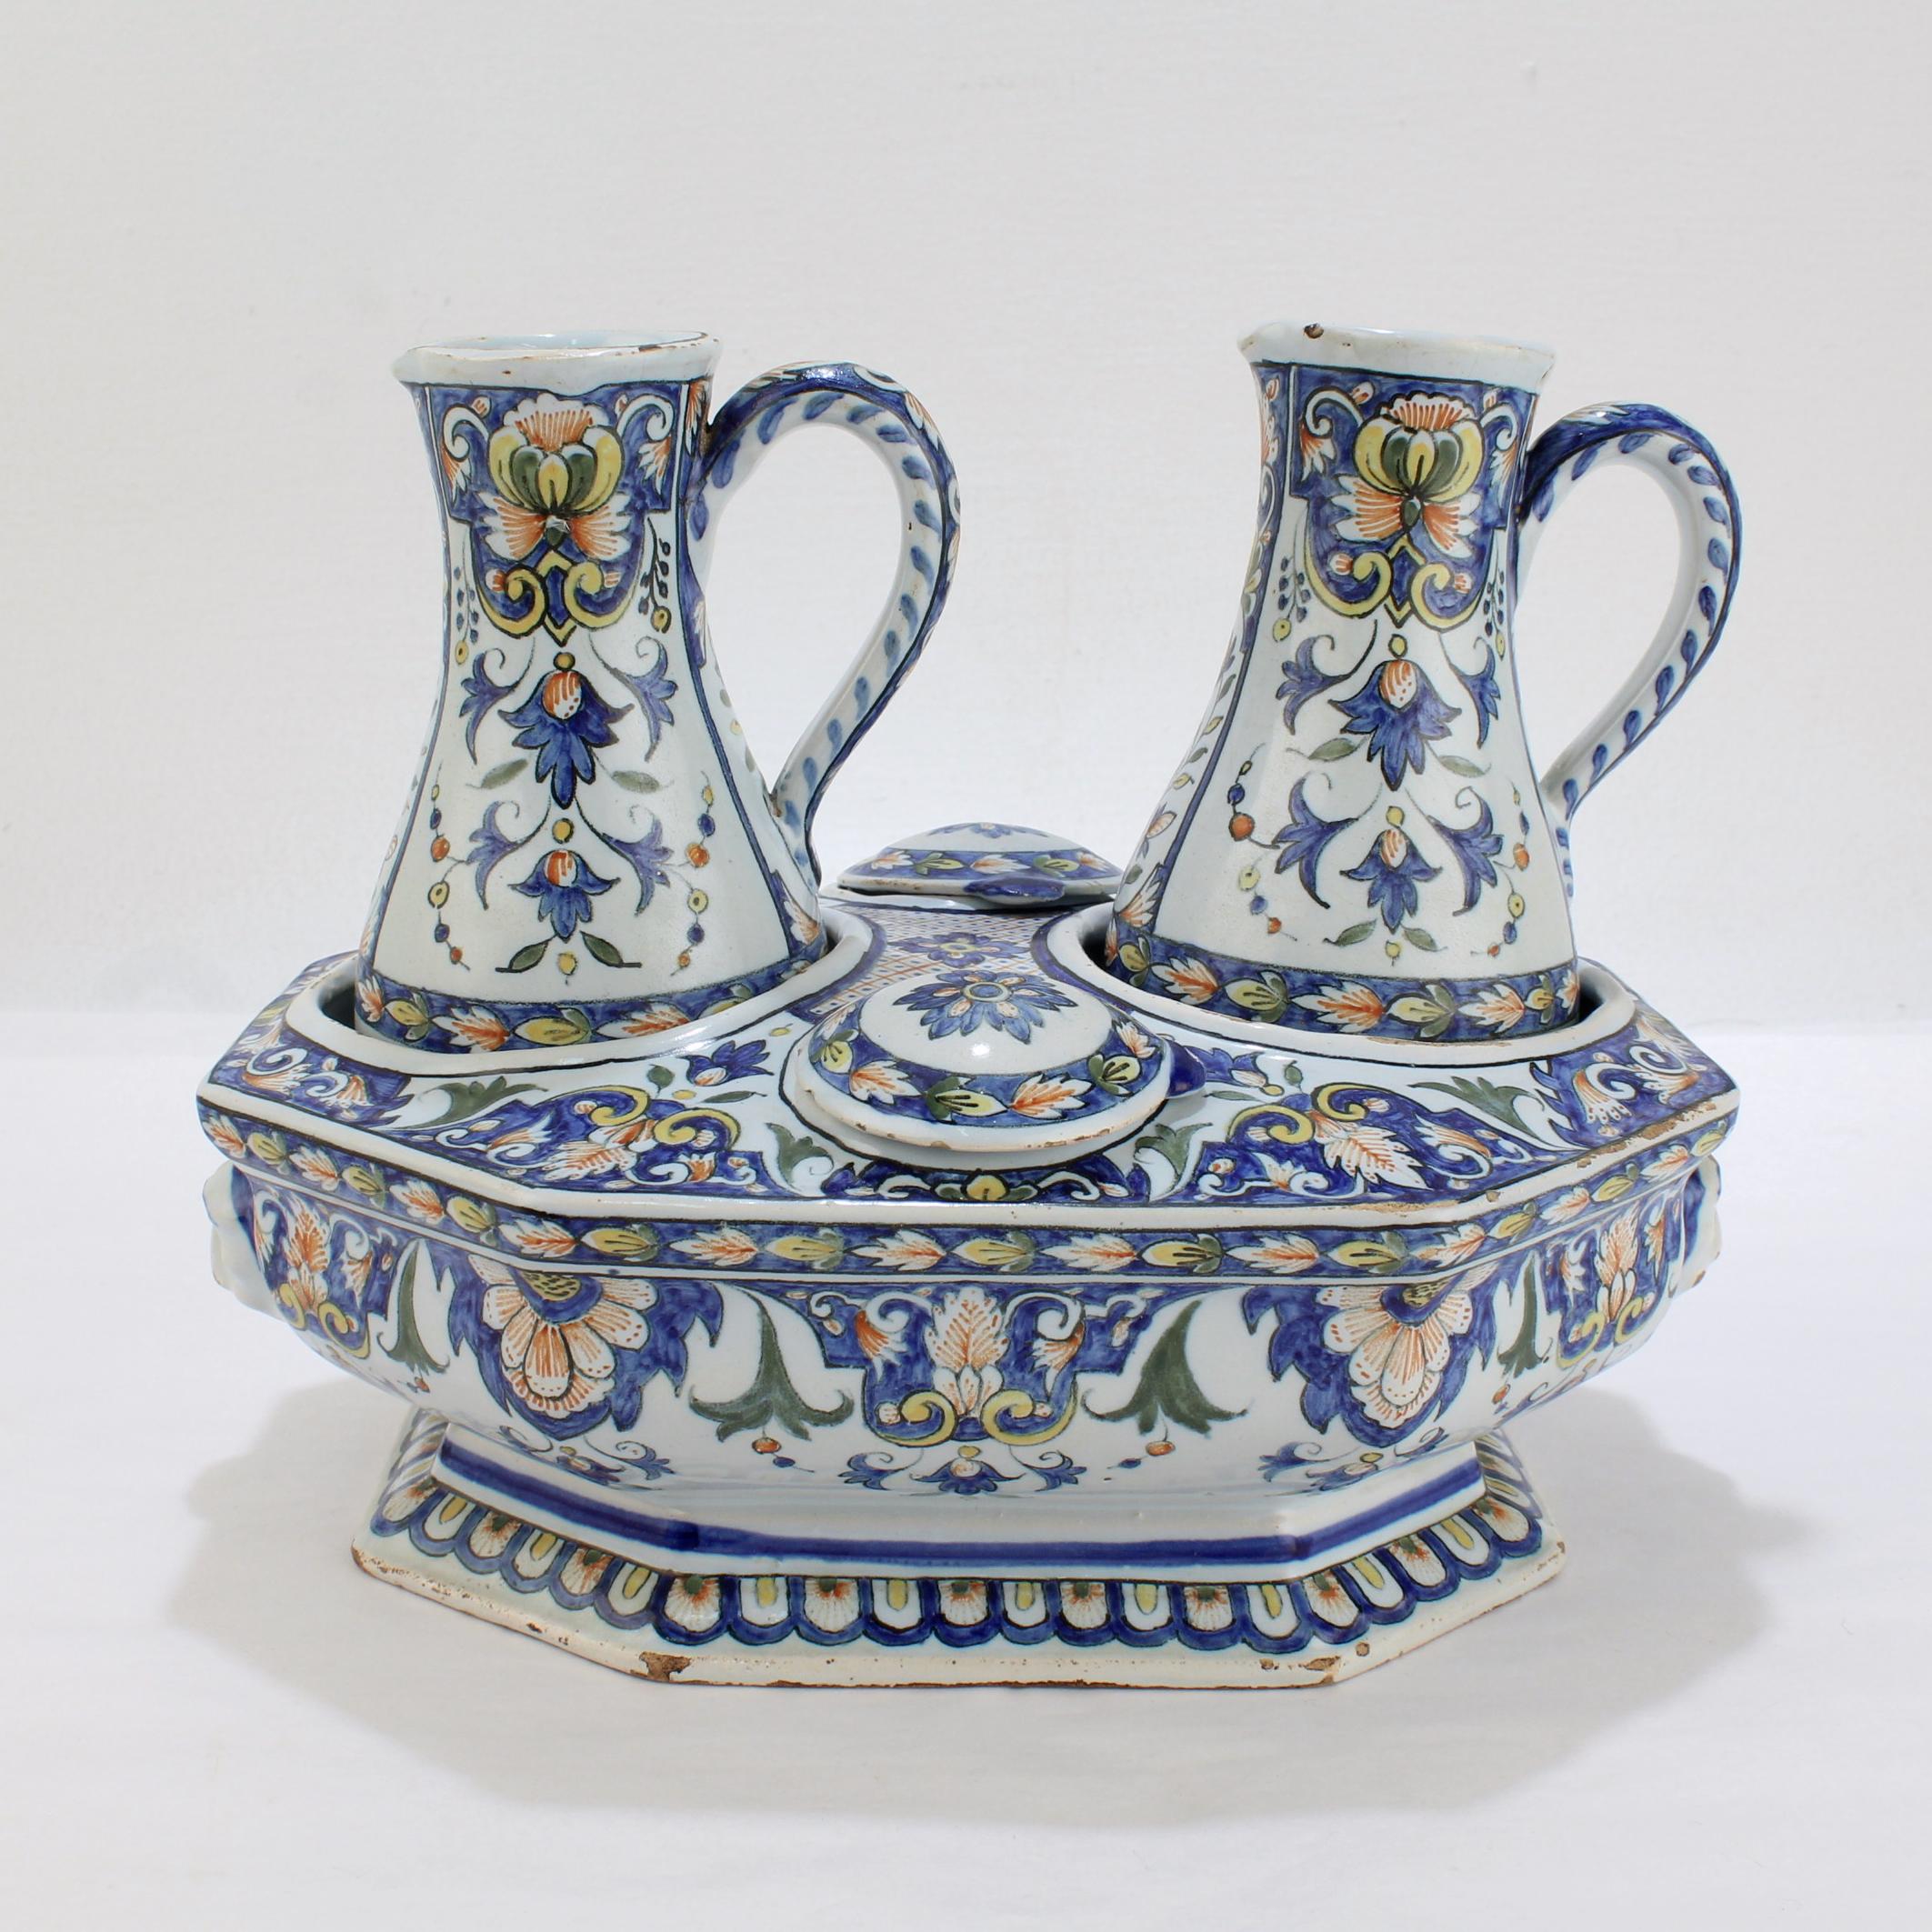 A very fine antique French Porquier Beau faience cruet stand.

Complete with the original base, ewers or small pitchers, and conforming lids.

Decorated in the Rouen style with blues, greens, yellows and oranges.

The base has stylized lion face